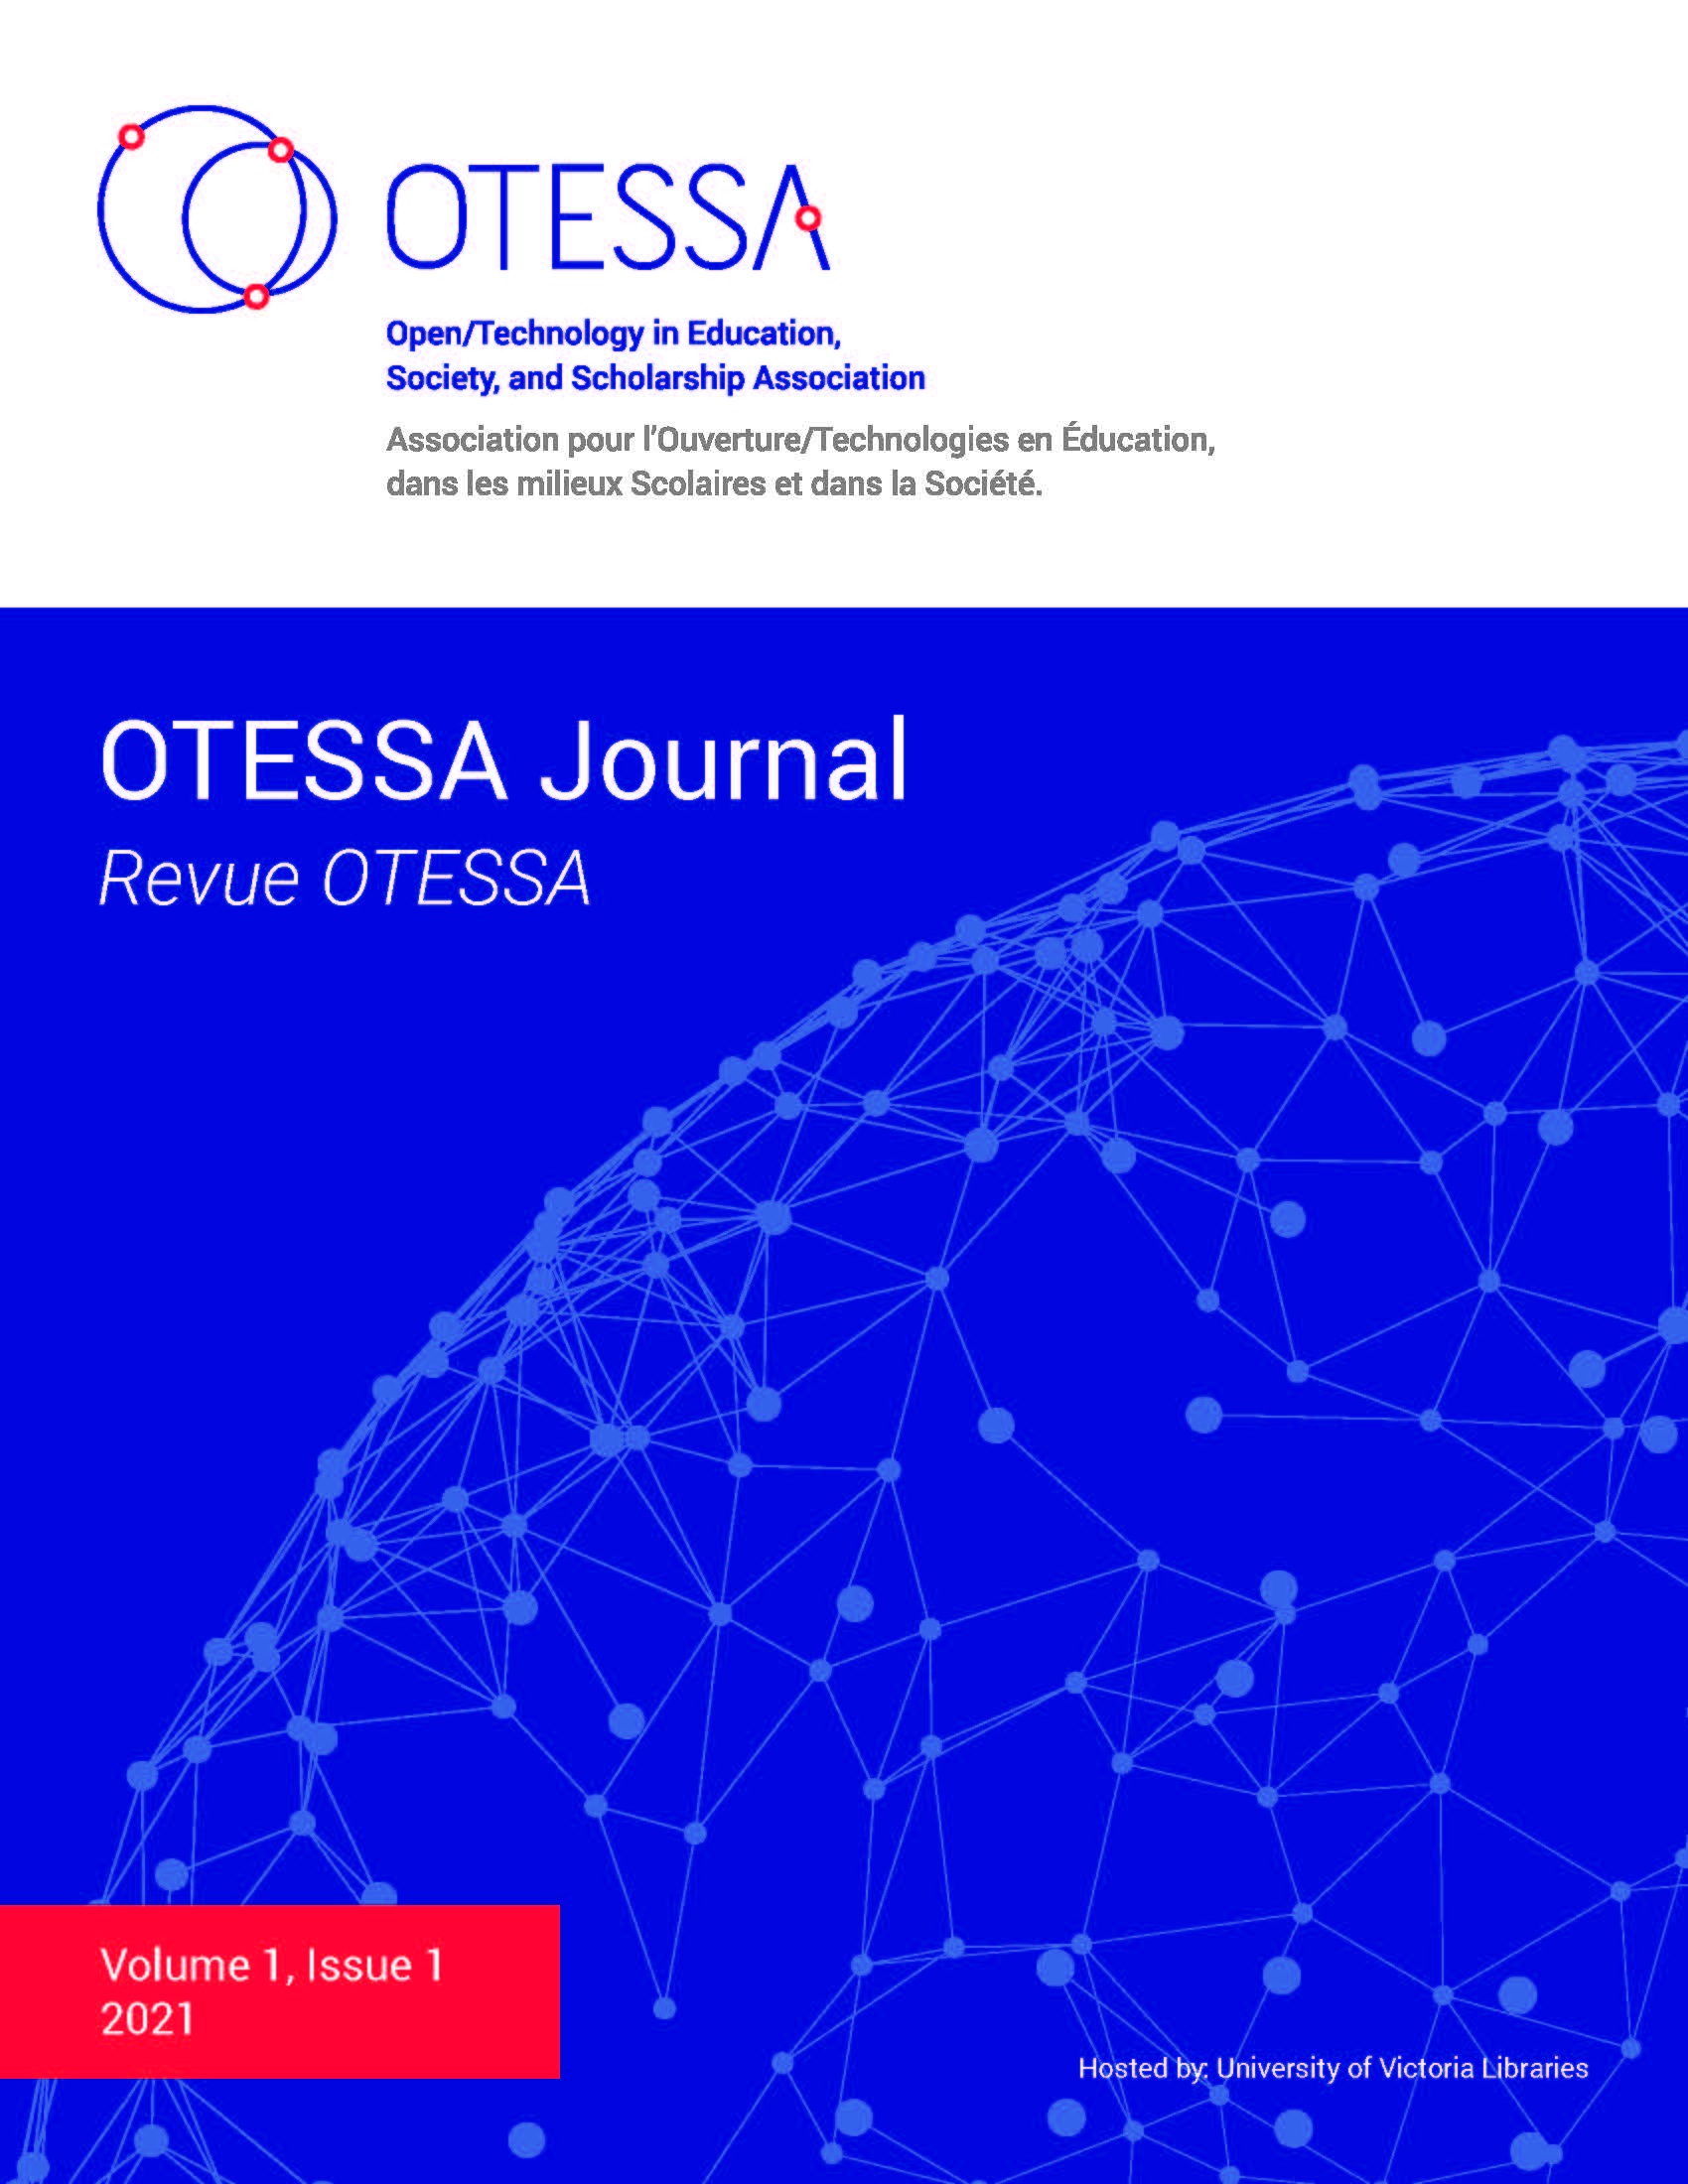 Cover art for OTESSA Journal Volume 1 Issue 1 / Revue OTESSA Volume 1 Numero 1. Hosted by University of Victoria Libraries